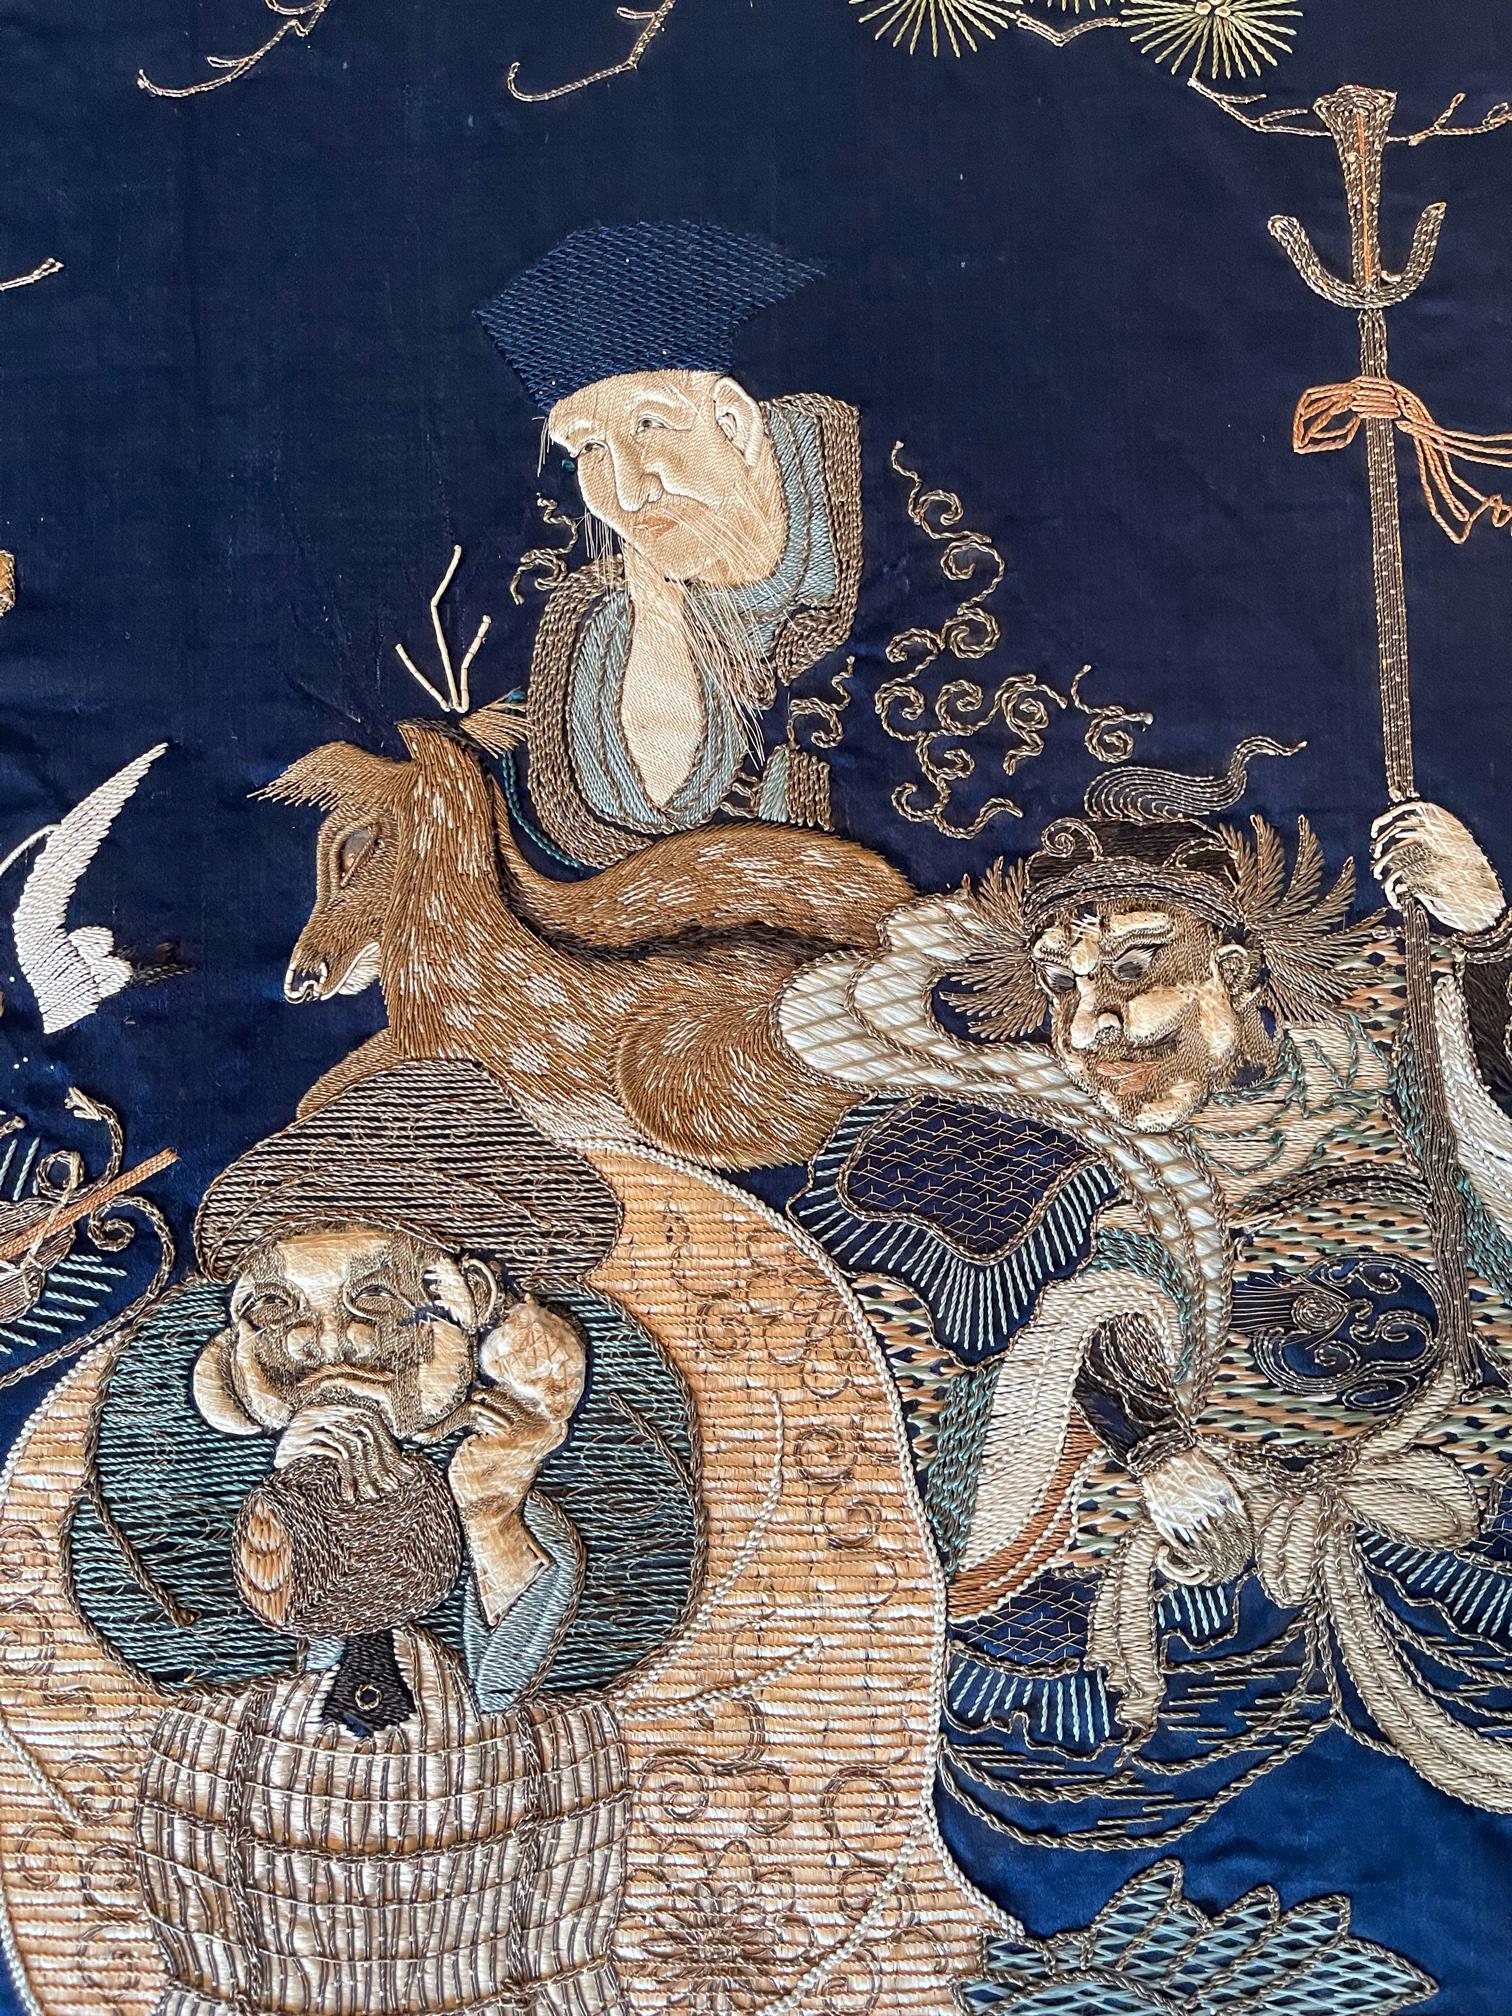 Framed Antique Japanese Silk Embroidery Fukusa Textile Panel In Good Condition For Sale In Atlanta, GA